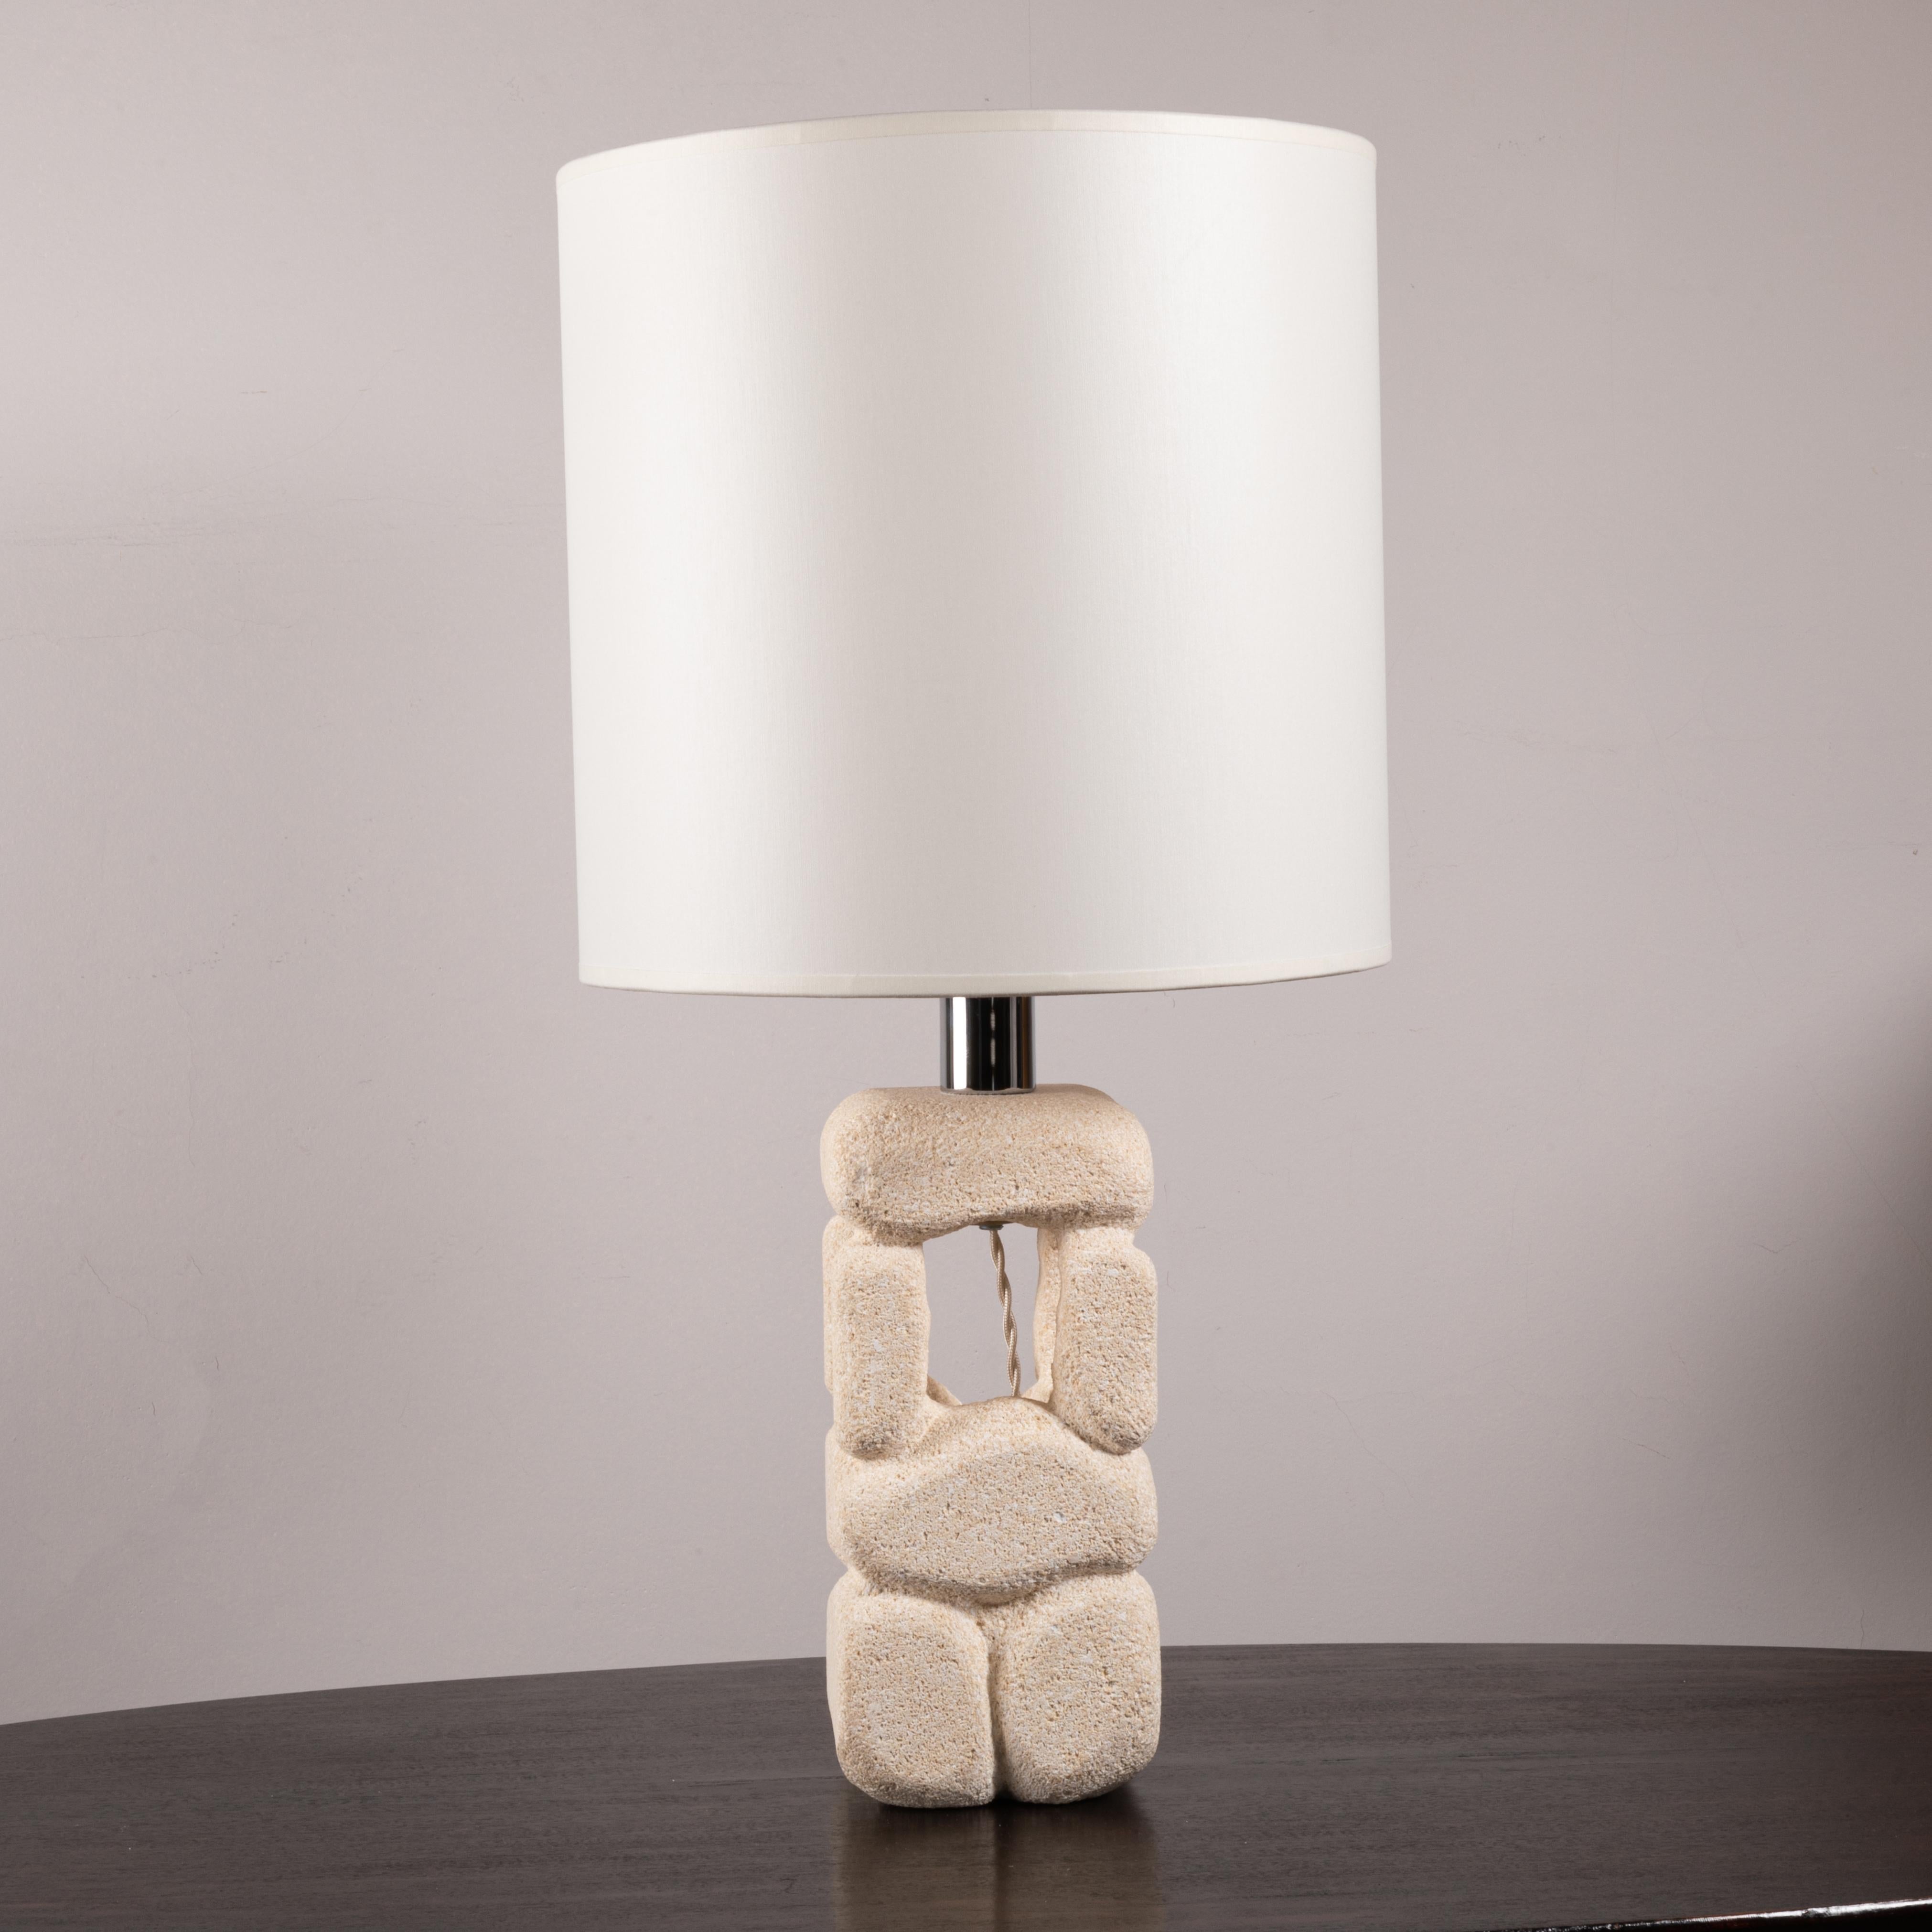 White stone table lamp by Albert Tormos. 
In a 